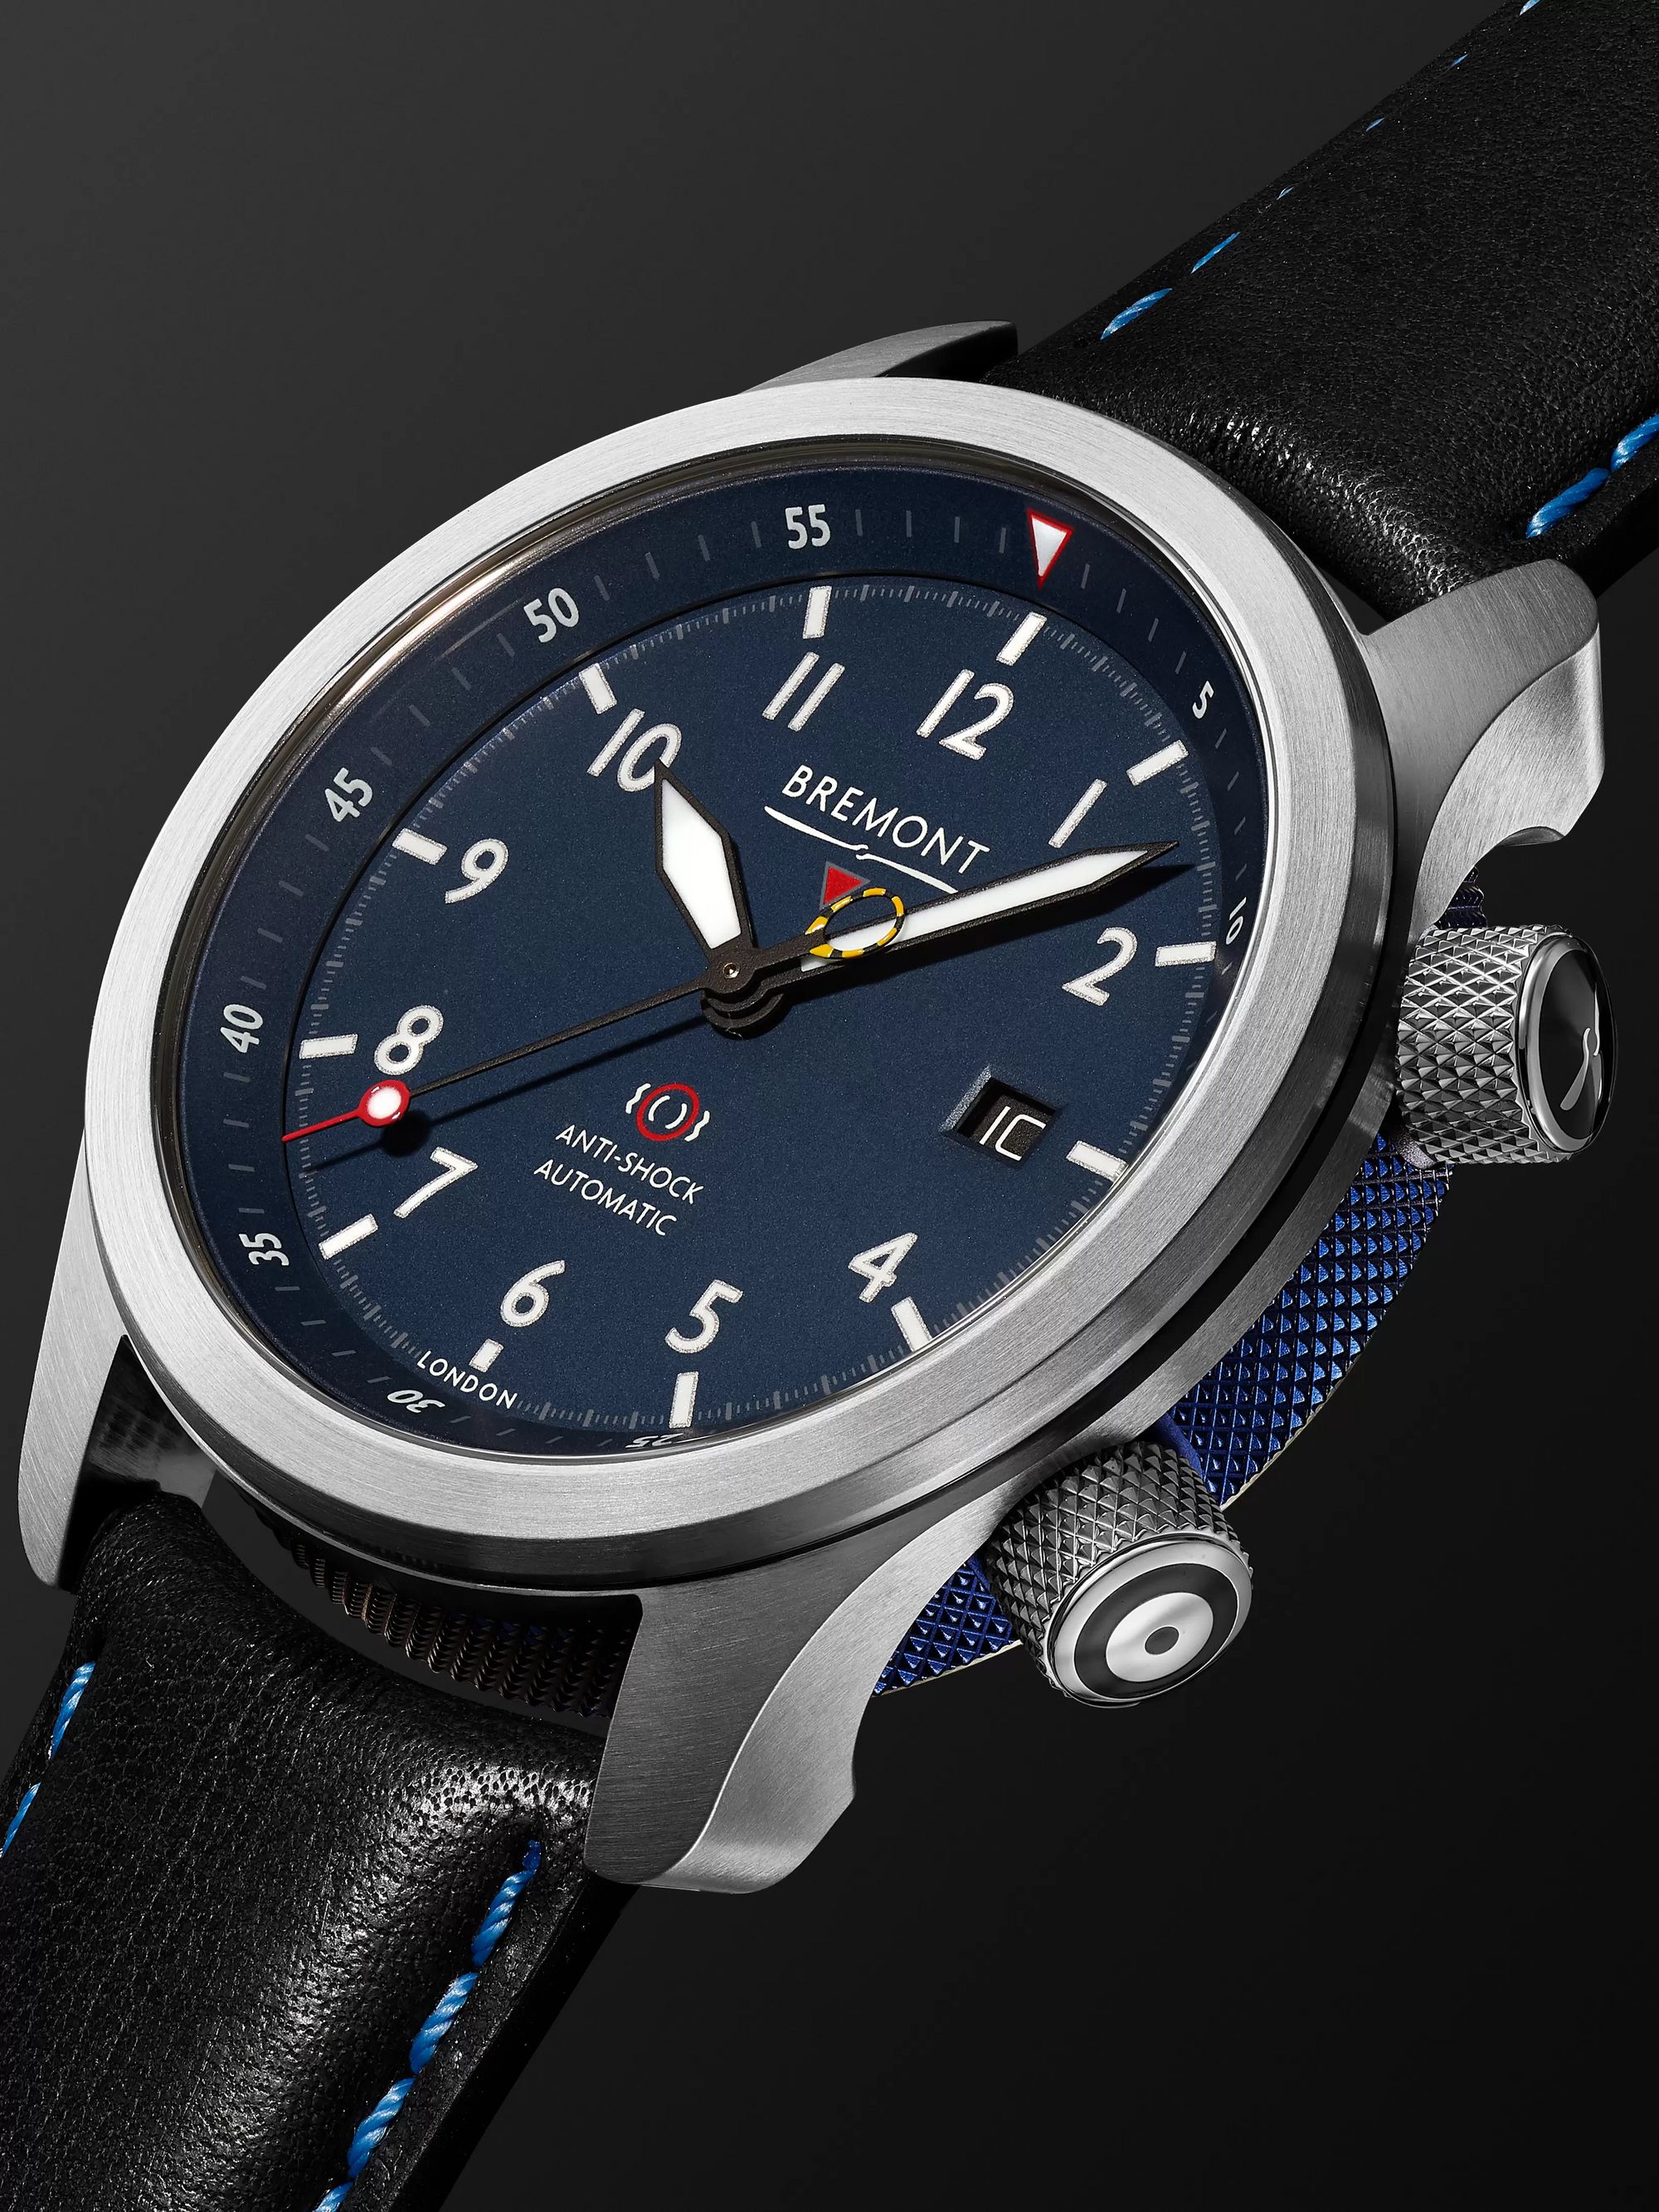 BREMONT MBII Blue Automatic 43mm Stainless Steel and Leather Watch, Ref. MBII-SS-BL-C-B-P-13R